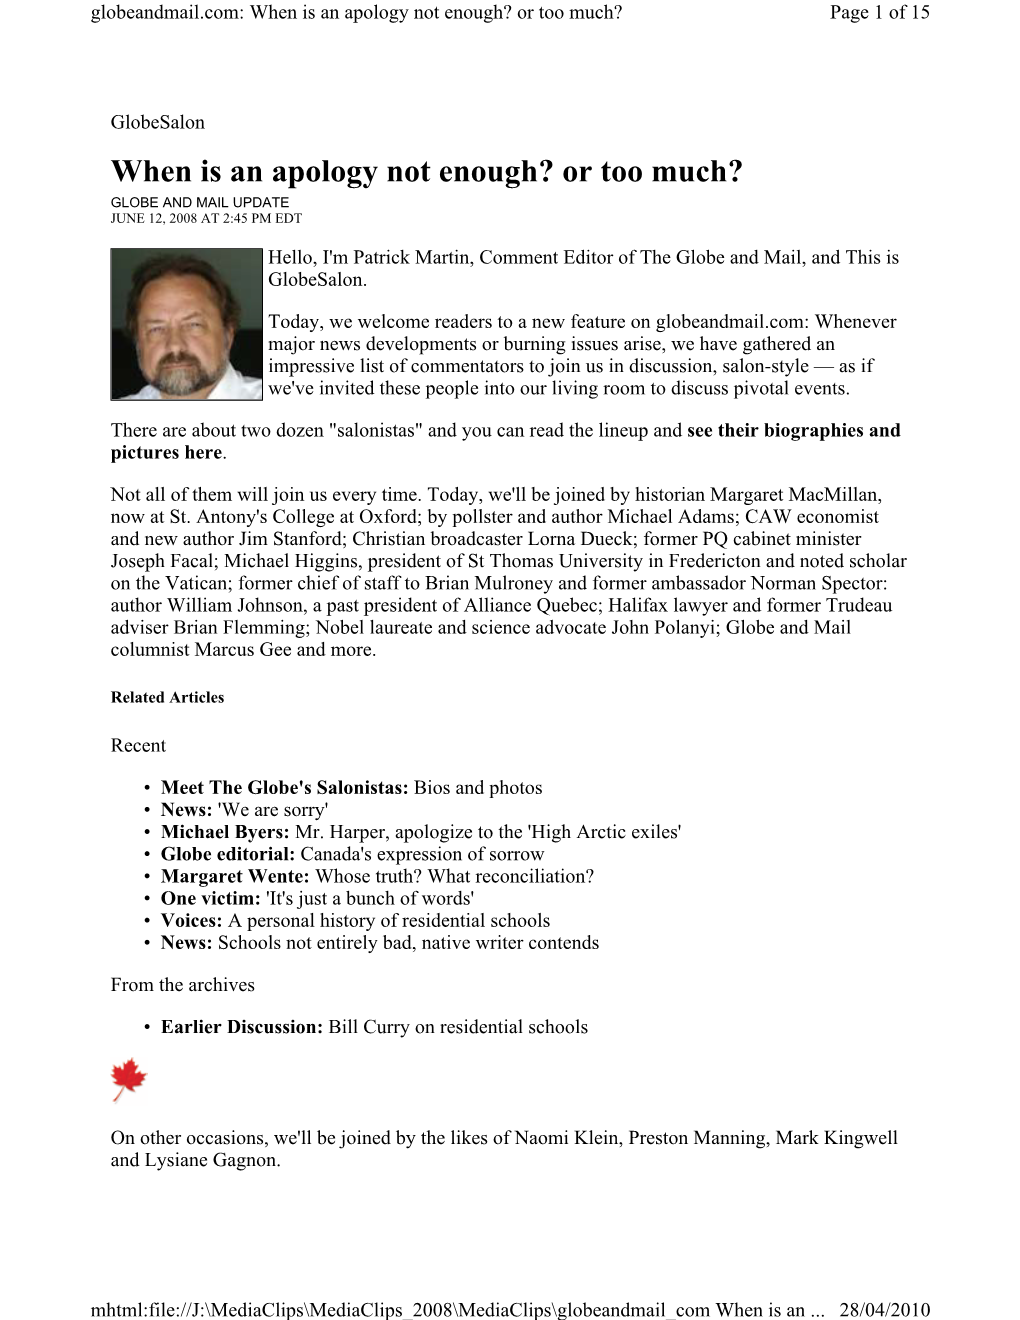 When Is an Apology Not Enough? Or Too Much? Page 1 of 15